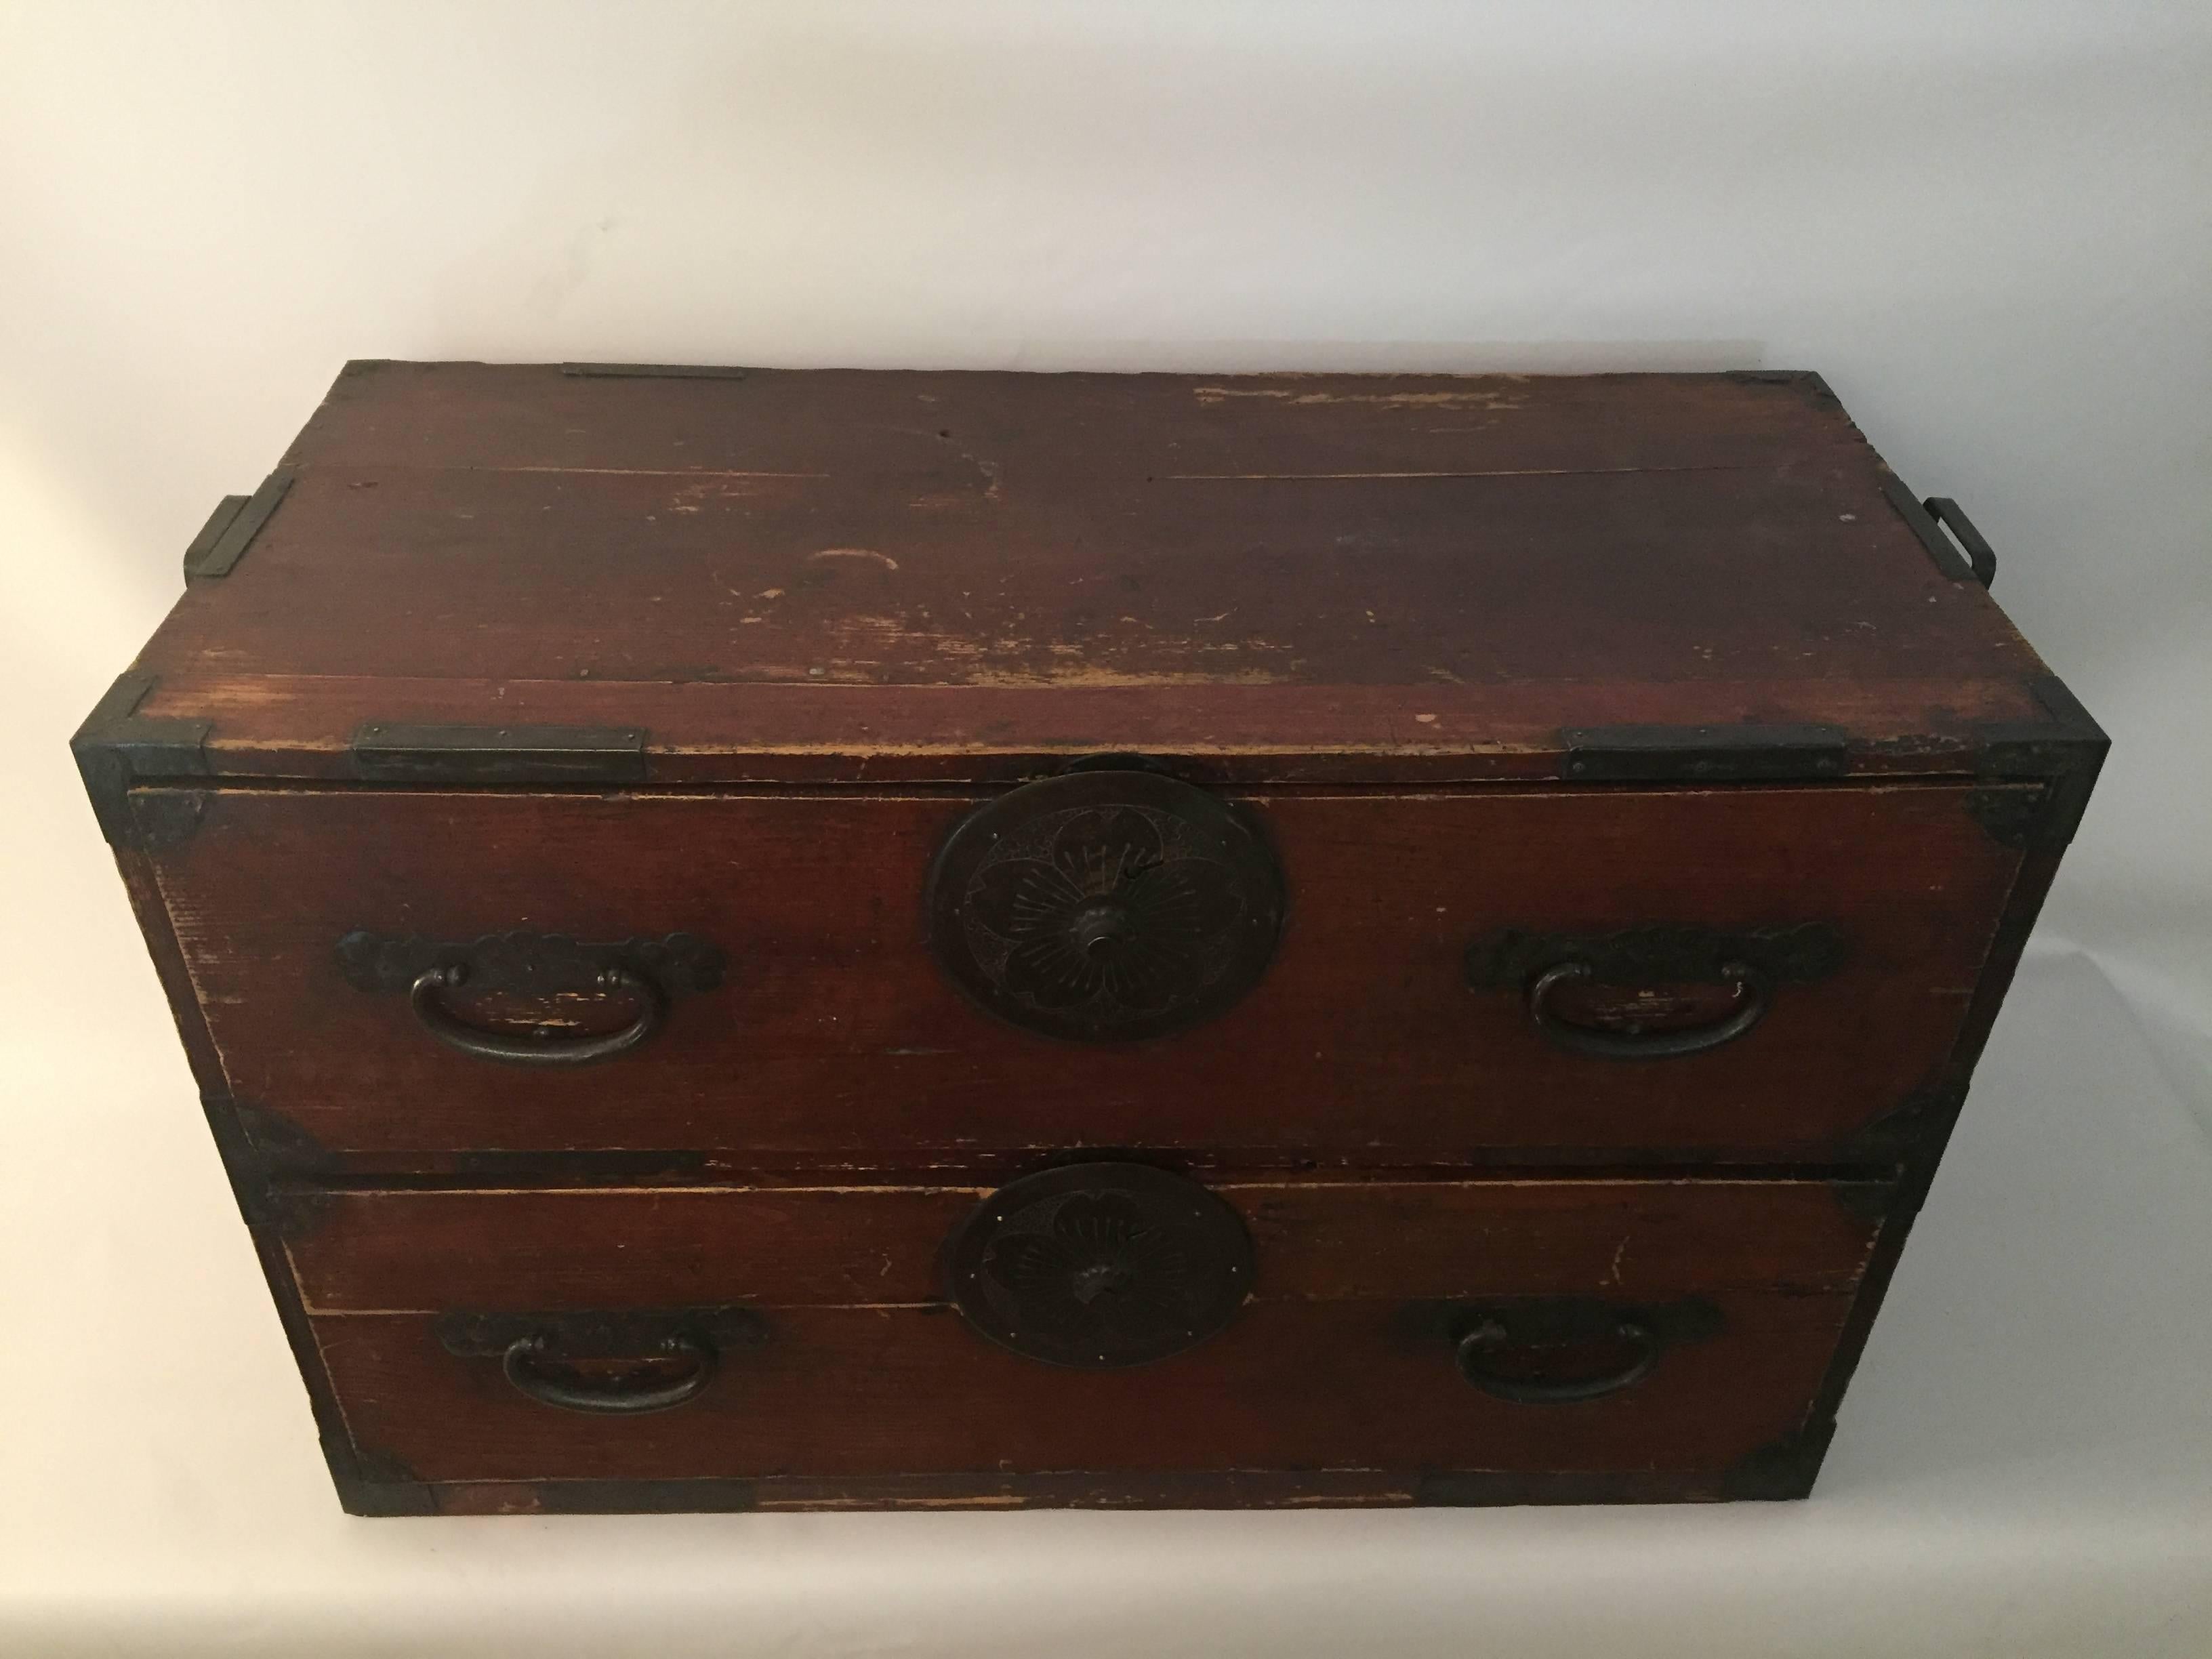 Gorgeous two-drawer wood and iron Japanese tansu. One half of an original two-section tansu. All original hardware and original deep red finish. Dowel drawer dovetailing. This is one half of an original two-section tansu. 


Measures: 16" deep